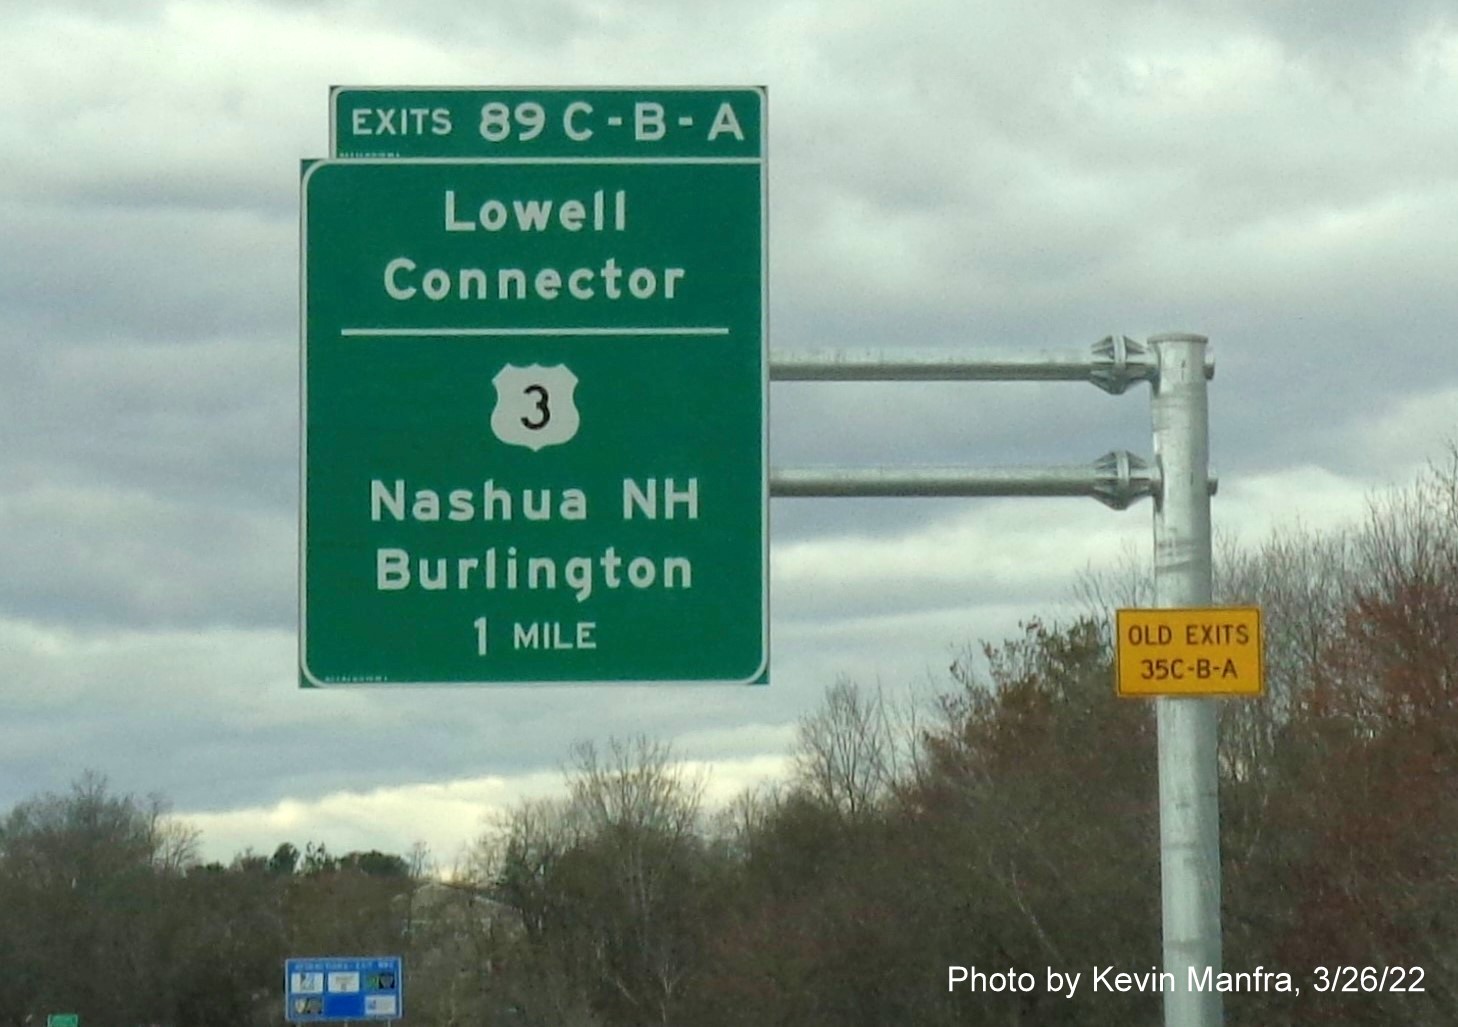 Image of recently placed new 1 mile advance overhead sign for Lowell Connector/US 3 exits on I-495 South in Chelmsford, by Kevin Manfra, March 2022